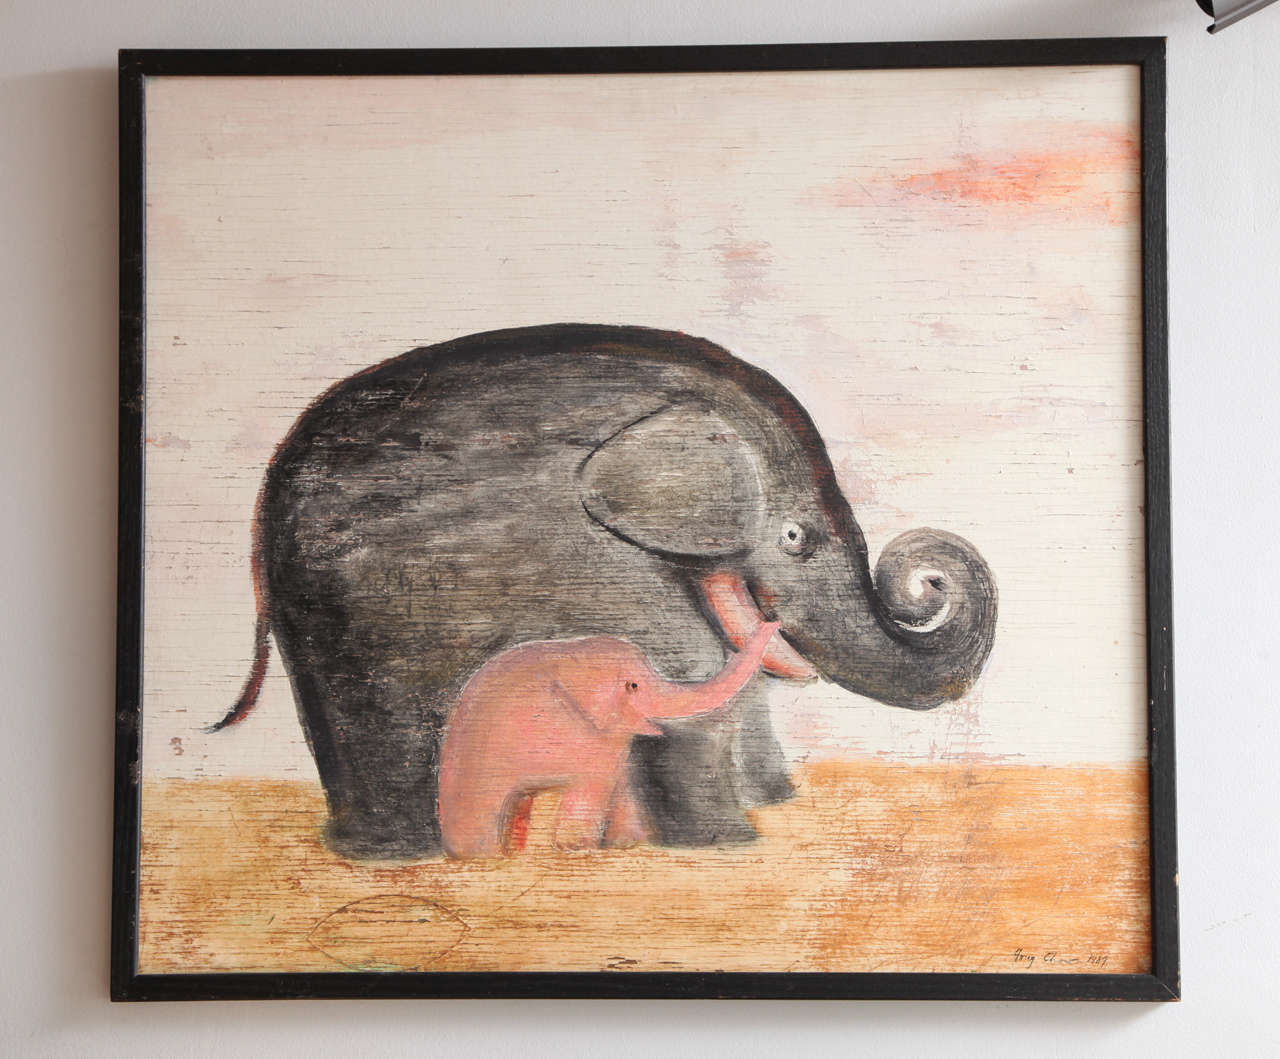 A charming painting by Fong Chow of a mother elephant and her pink baby.